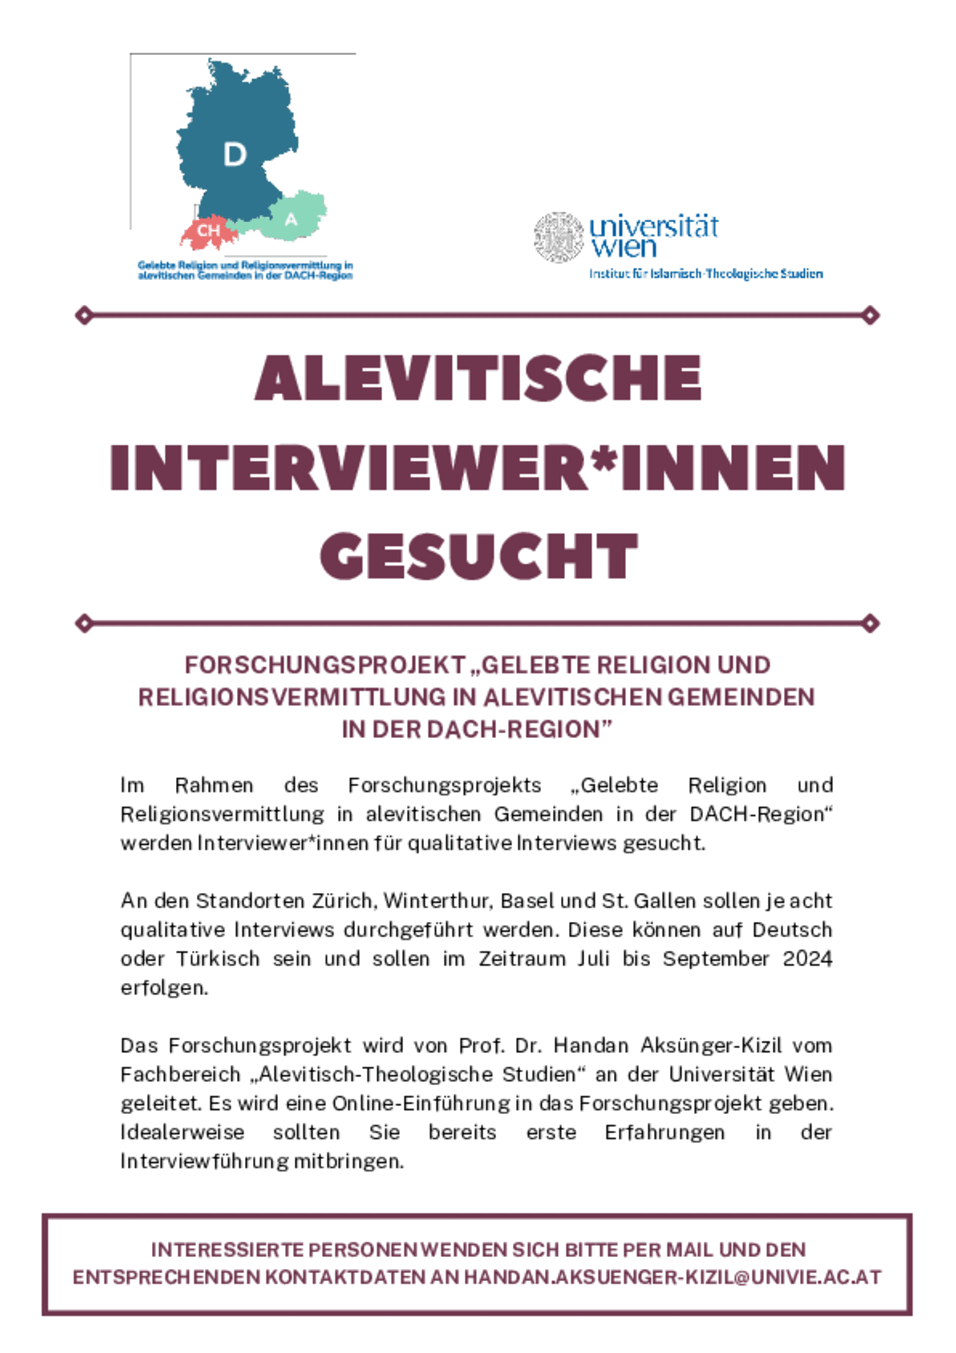 Opens PDF: Interview flyer